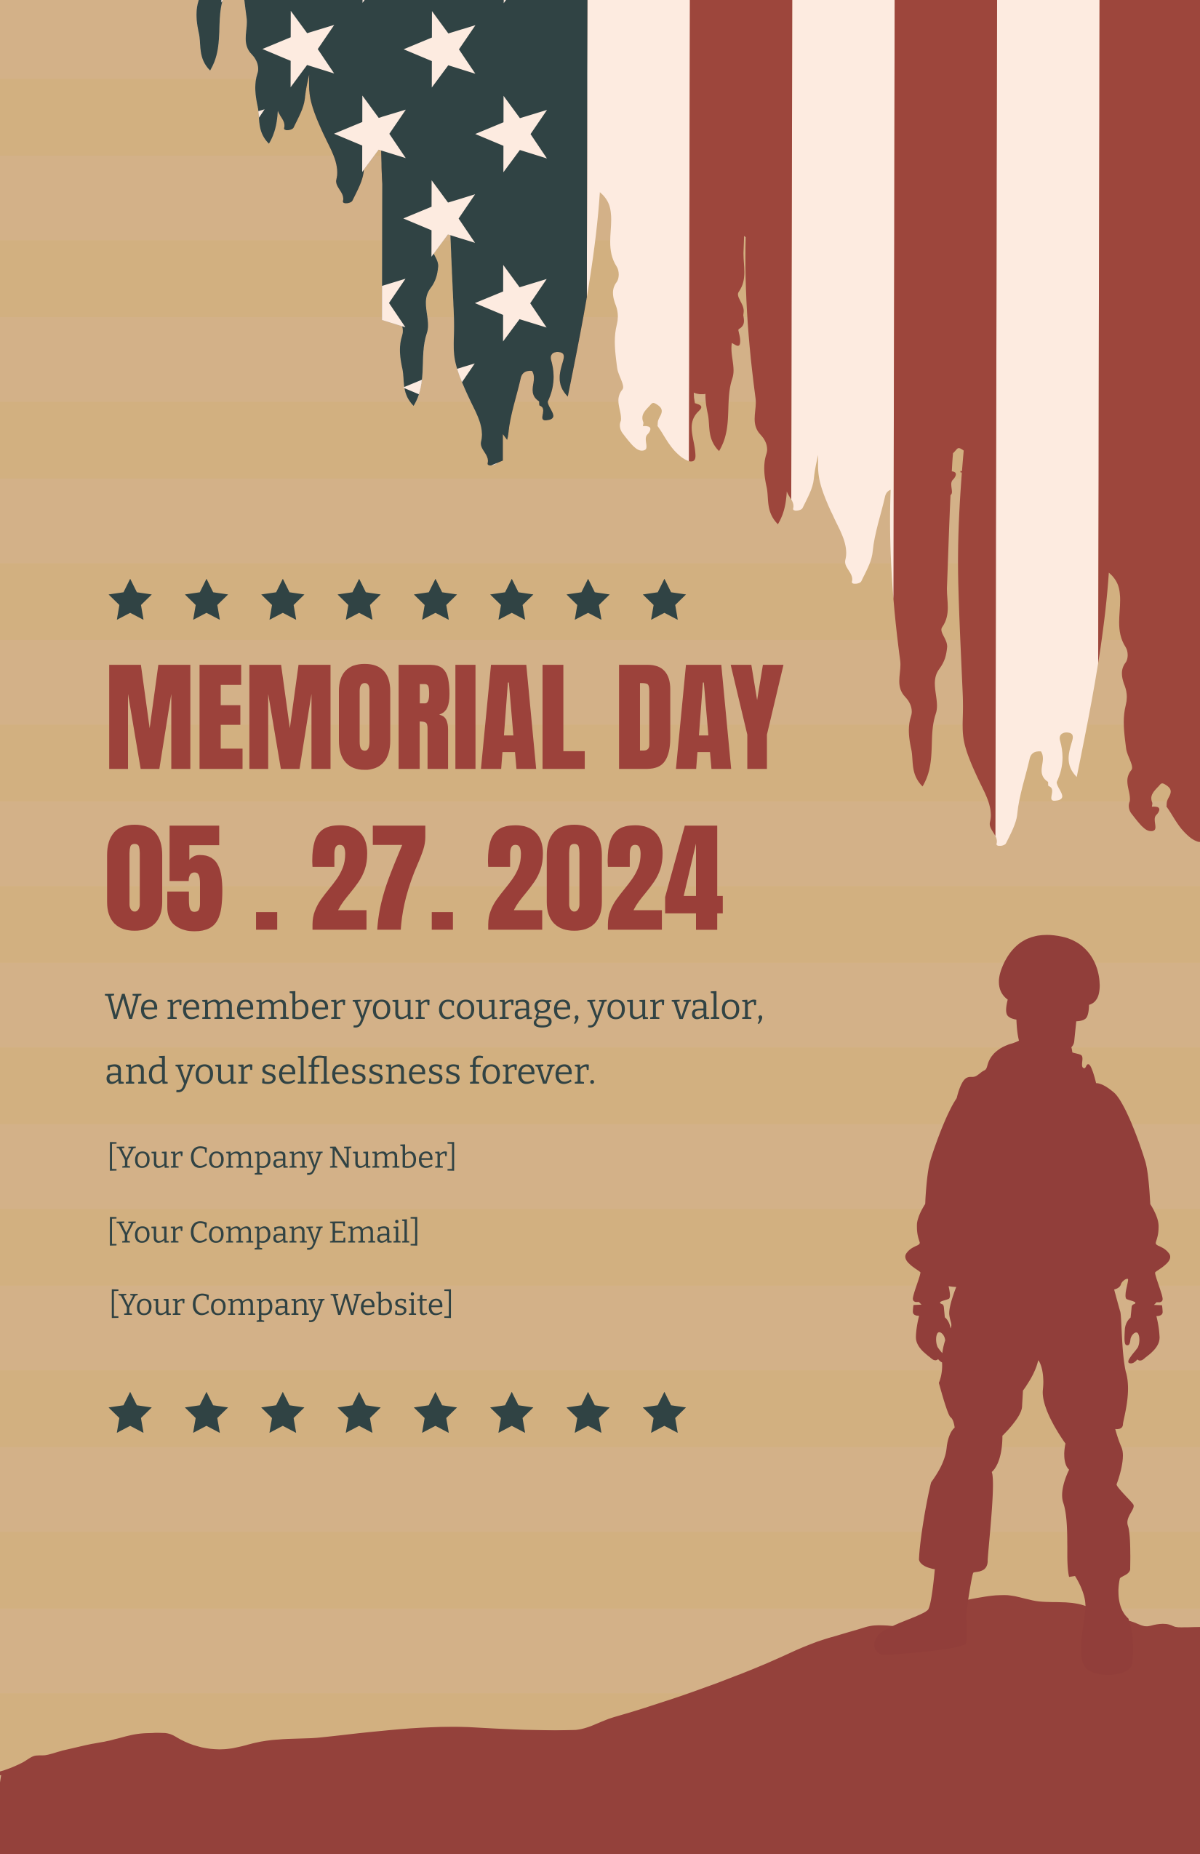 Memorial Day Vintage Poster Template